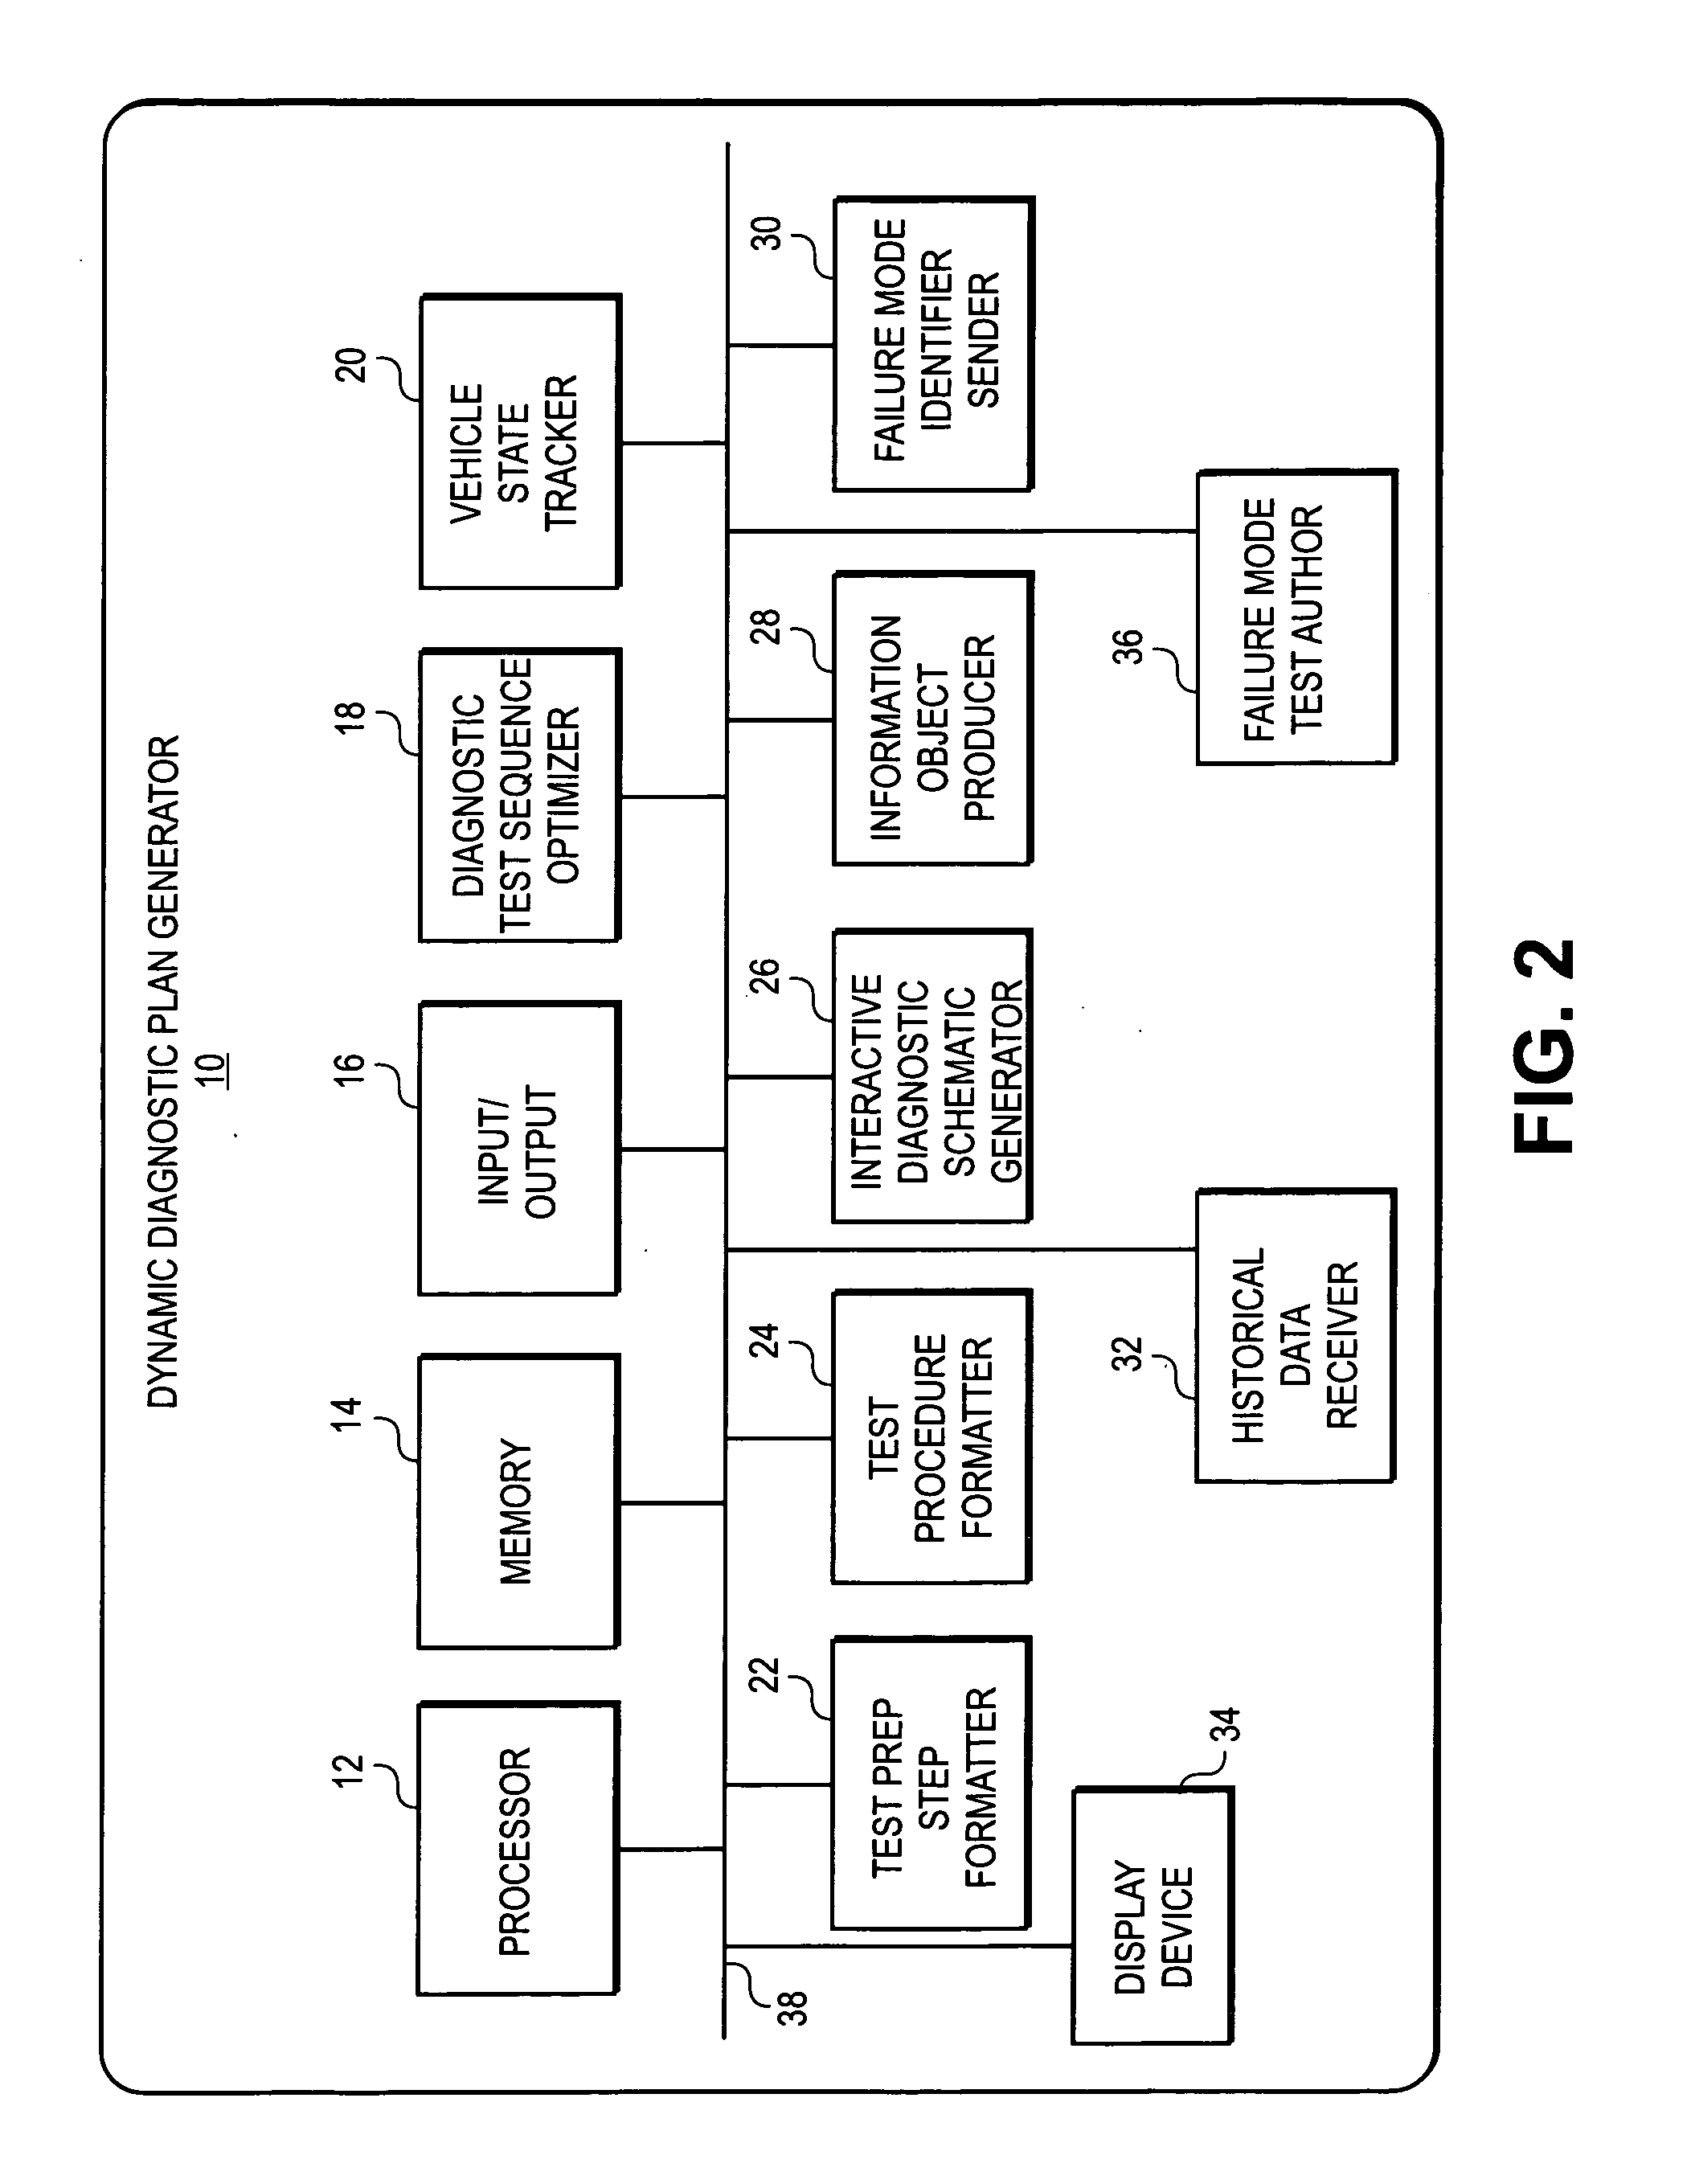 Dynamic decision sequencing method and apparatus for optimizing a diagnostic test plan